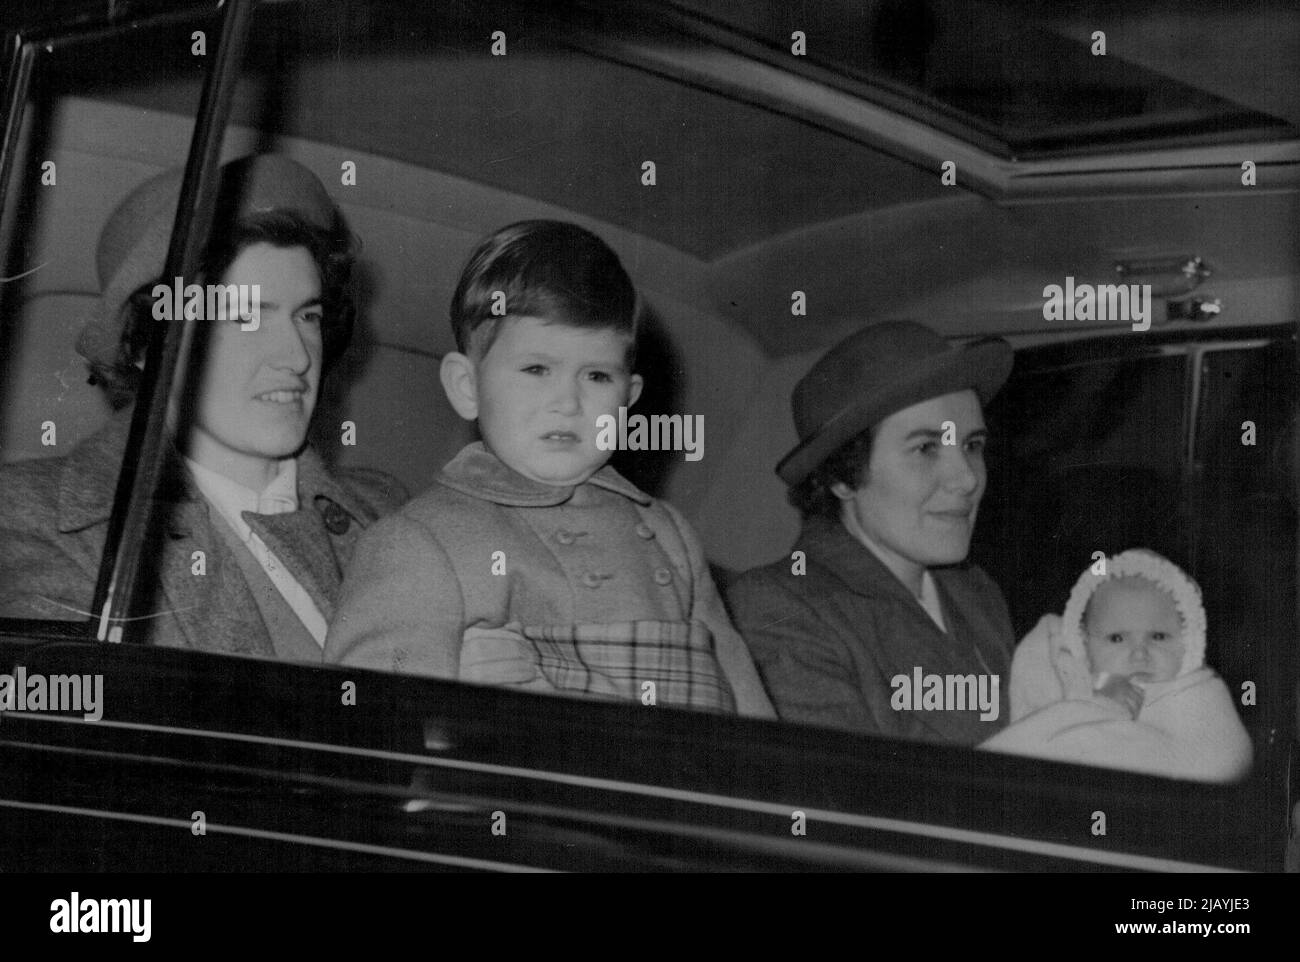 Baby Prince And Princess Go To Sandringham -- Princes Charles and his sister, Princess Anne - children of Princess Elizabeth and the Duke of Edinburgh - driving from Clarence House, London, to-day (Friday) en route to Sandringham where they will spend Christmas with the King and Queen. The baby Prince and Princess were understood to be going first to Buckingham Palace to join the King and Queen. December 22, 1950. (Photo by Reuterphoto). Stock Photo